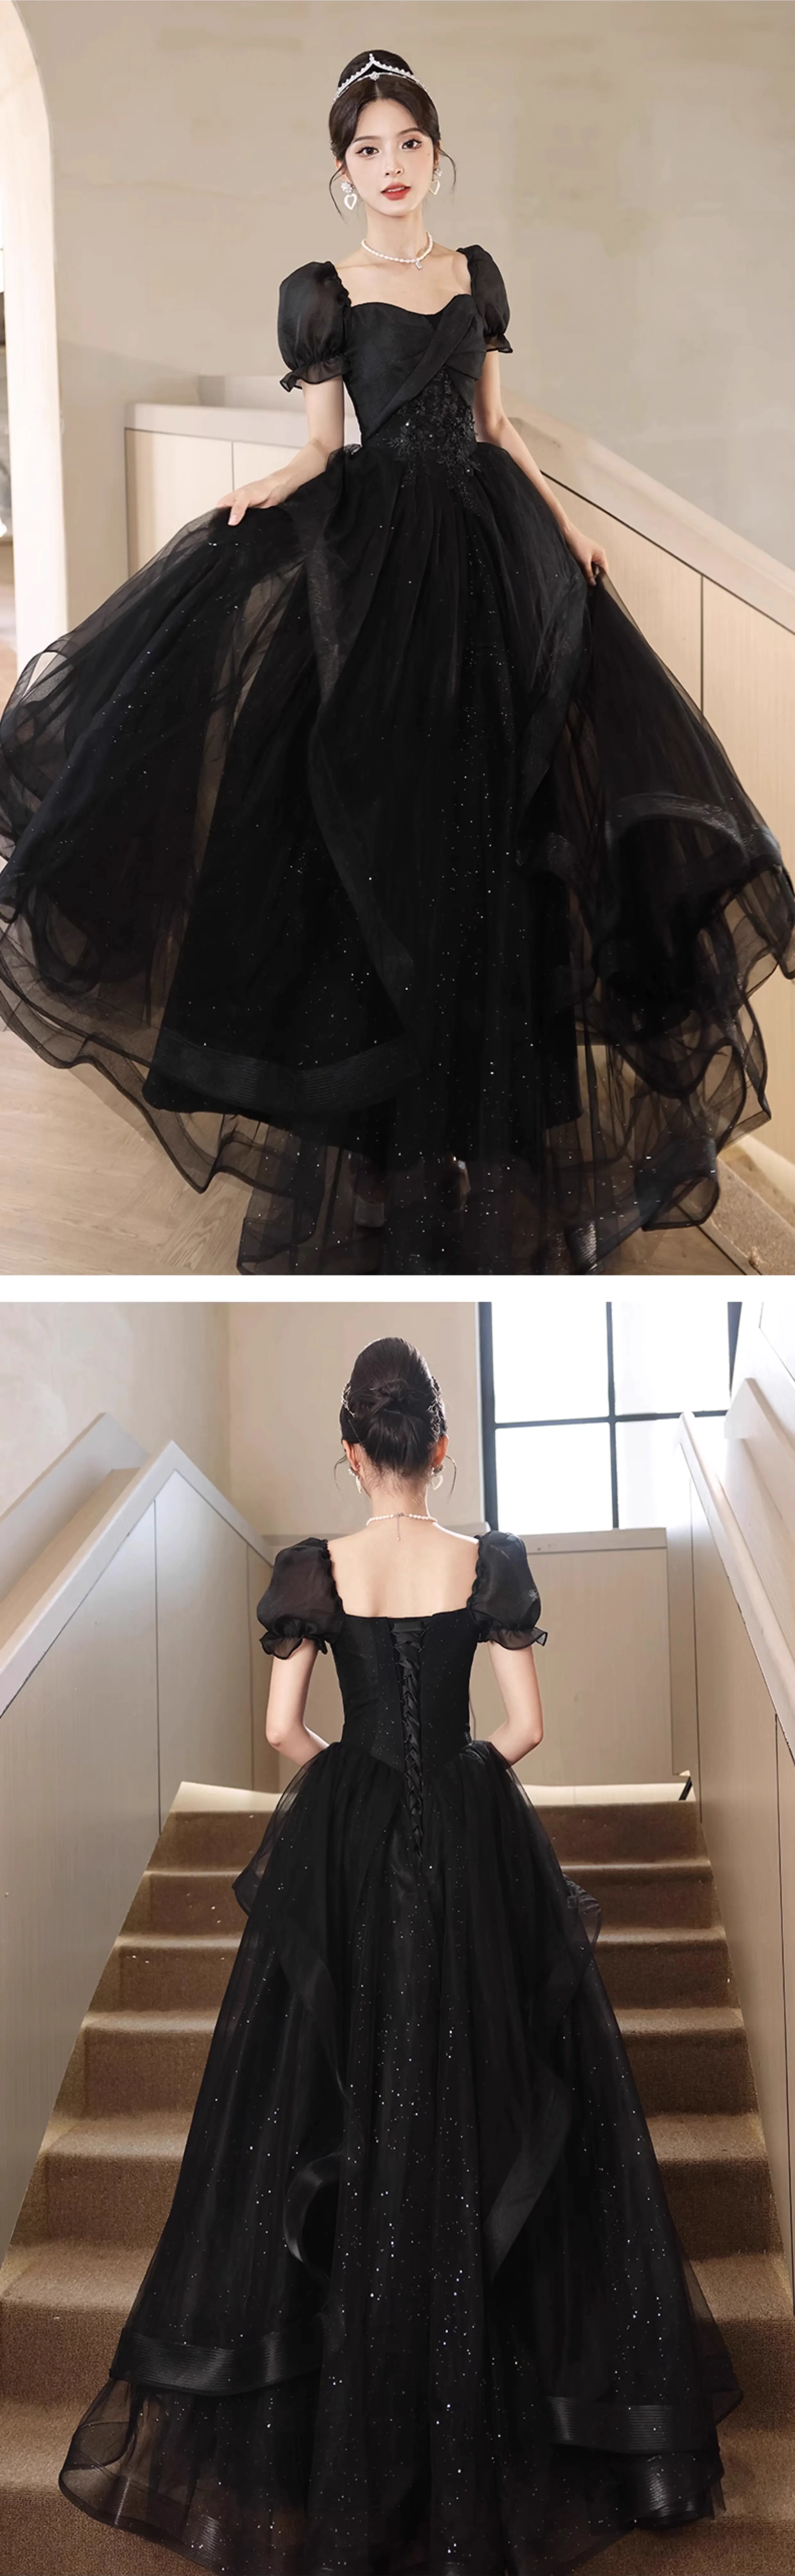 Black-Chiffon-Birthday-Party-Prom-Dress-Cocktail-Evening-Ball-Gown15